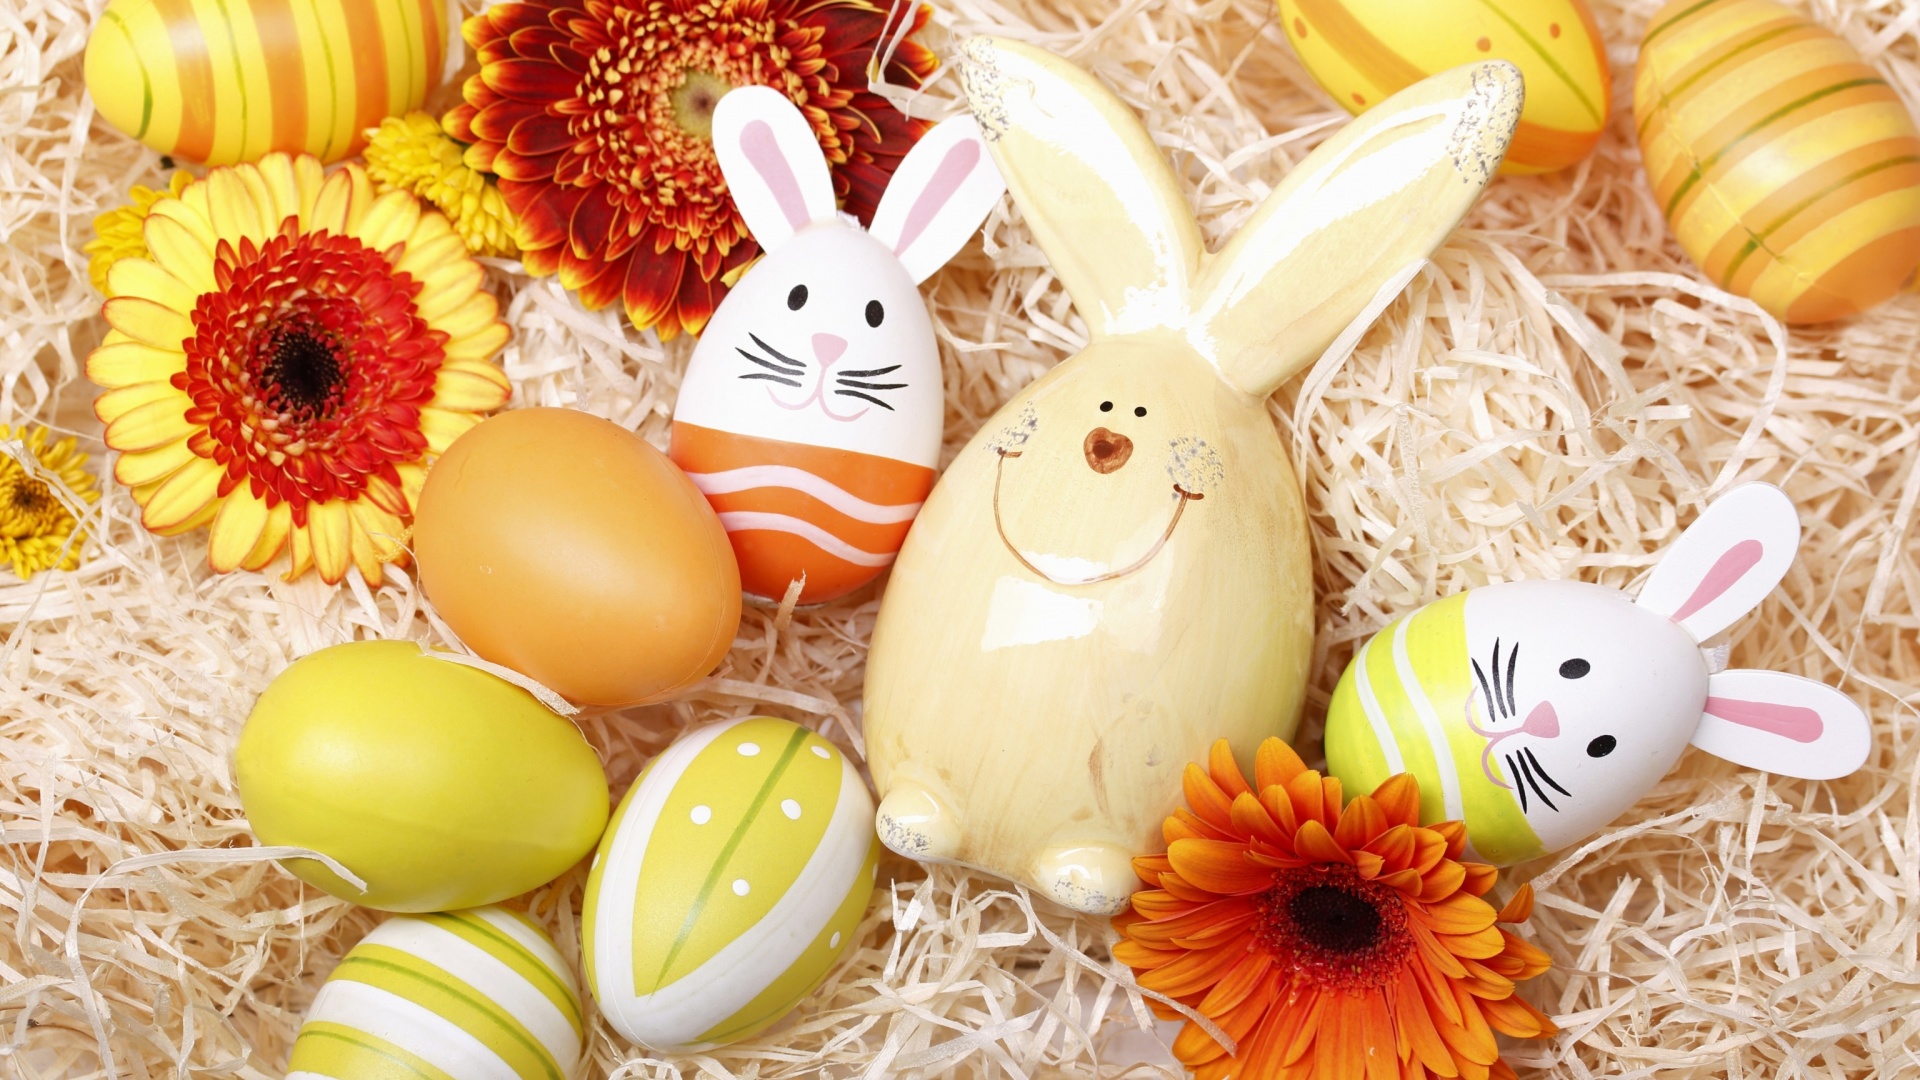 Das Easter Eggs Decoration with Hare Wallpaper 1920x1080